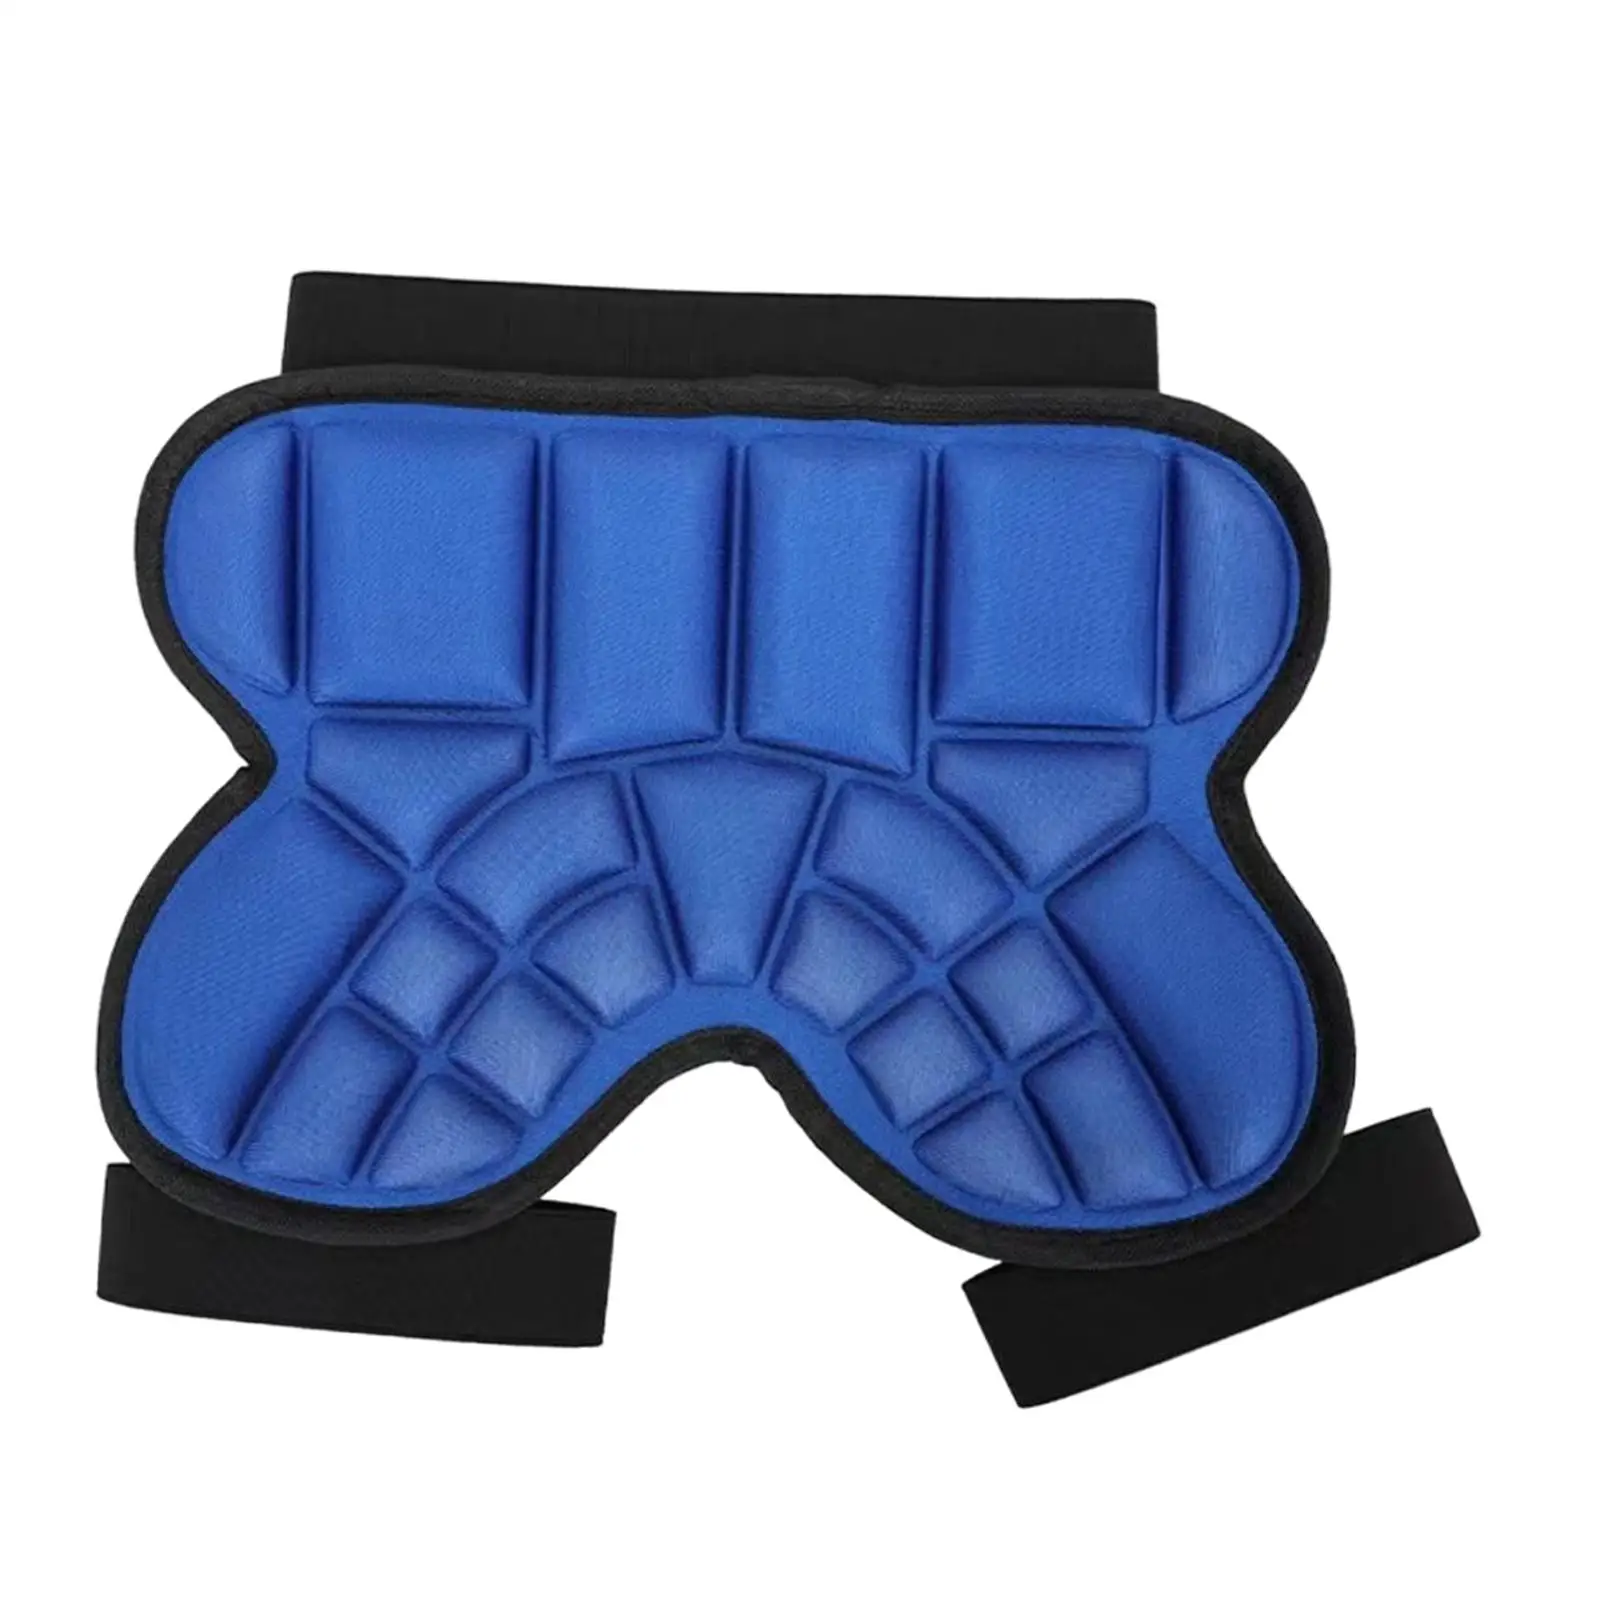 Hip Guard Pad Pad Support Gear Supporter Padded Hip Protection for Skiing Snowboarding Winter Sports Climbing Scooter